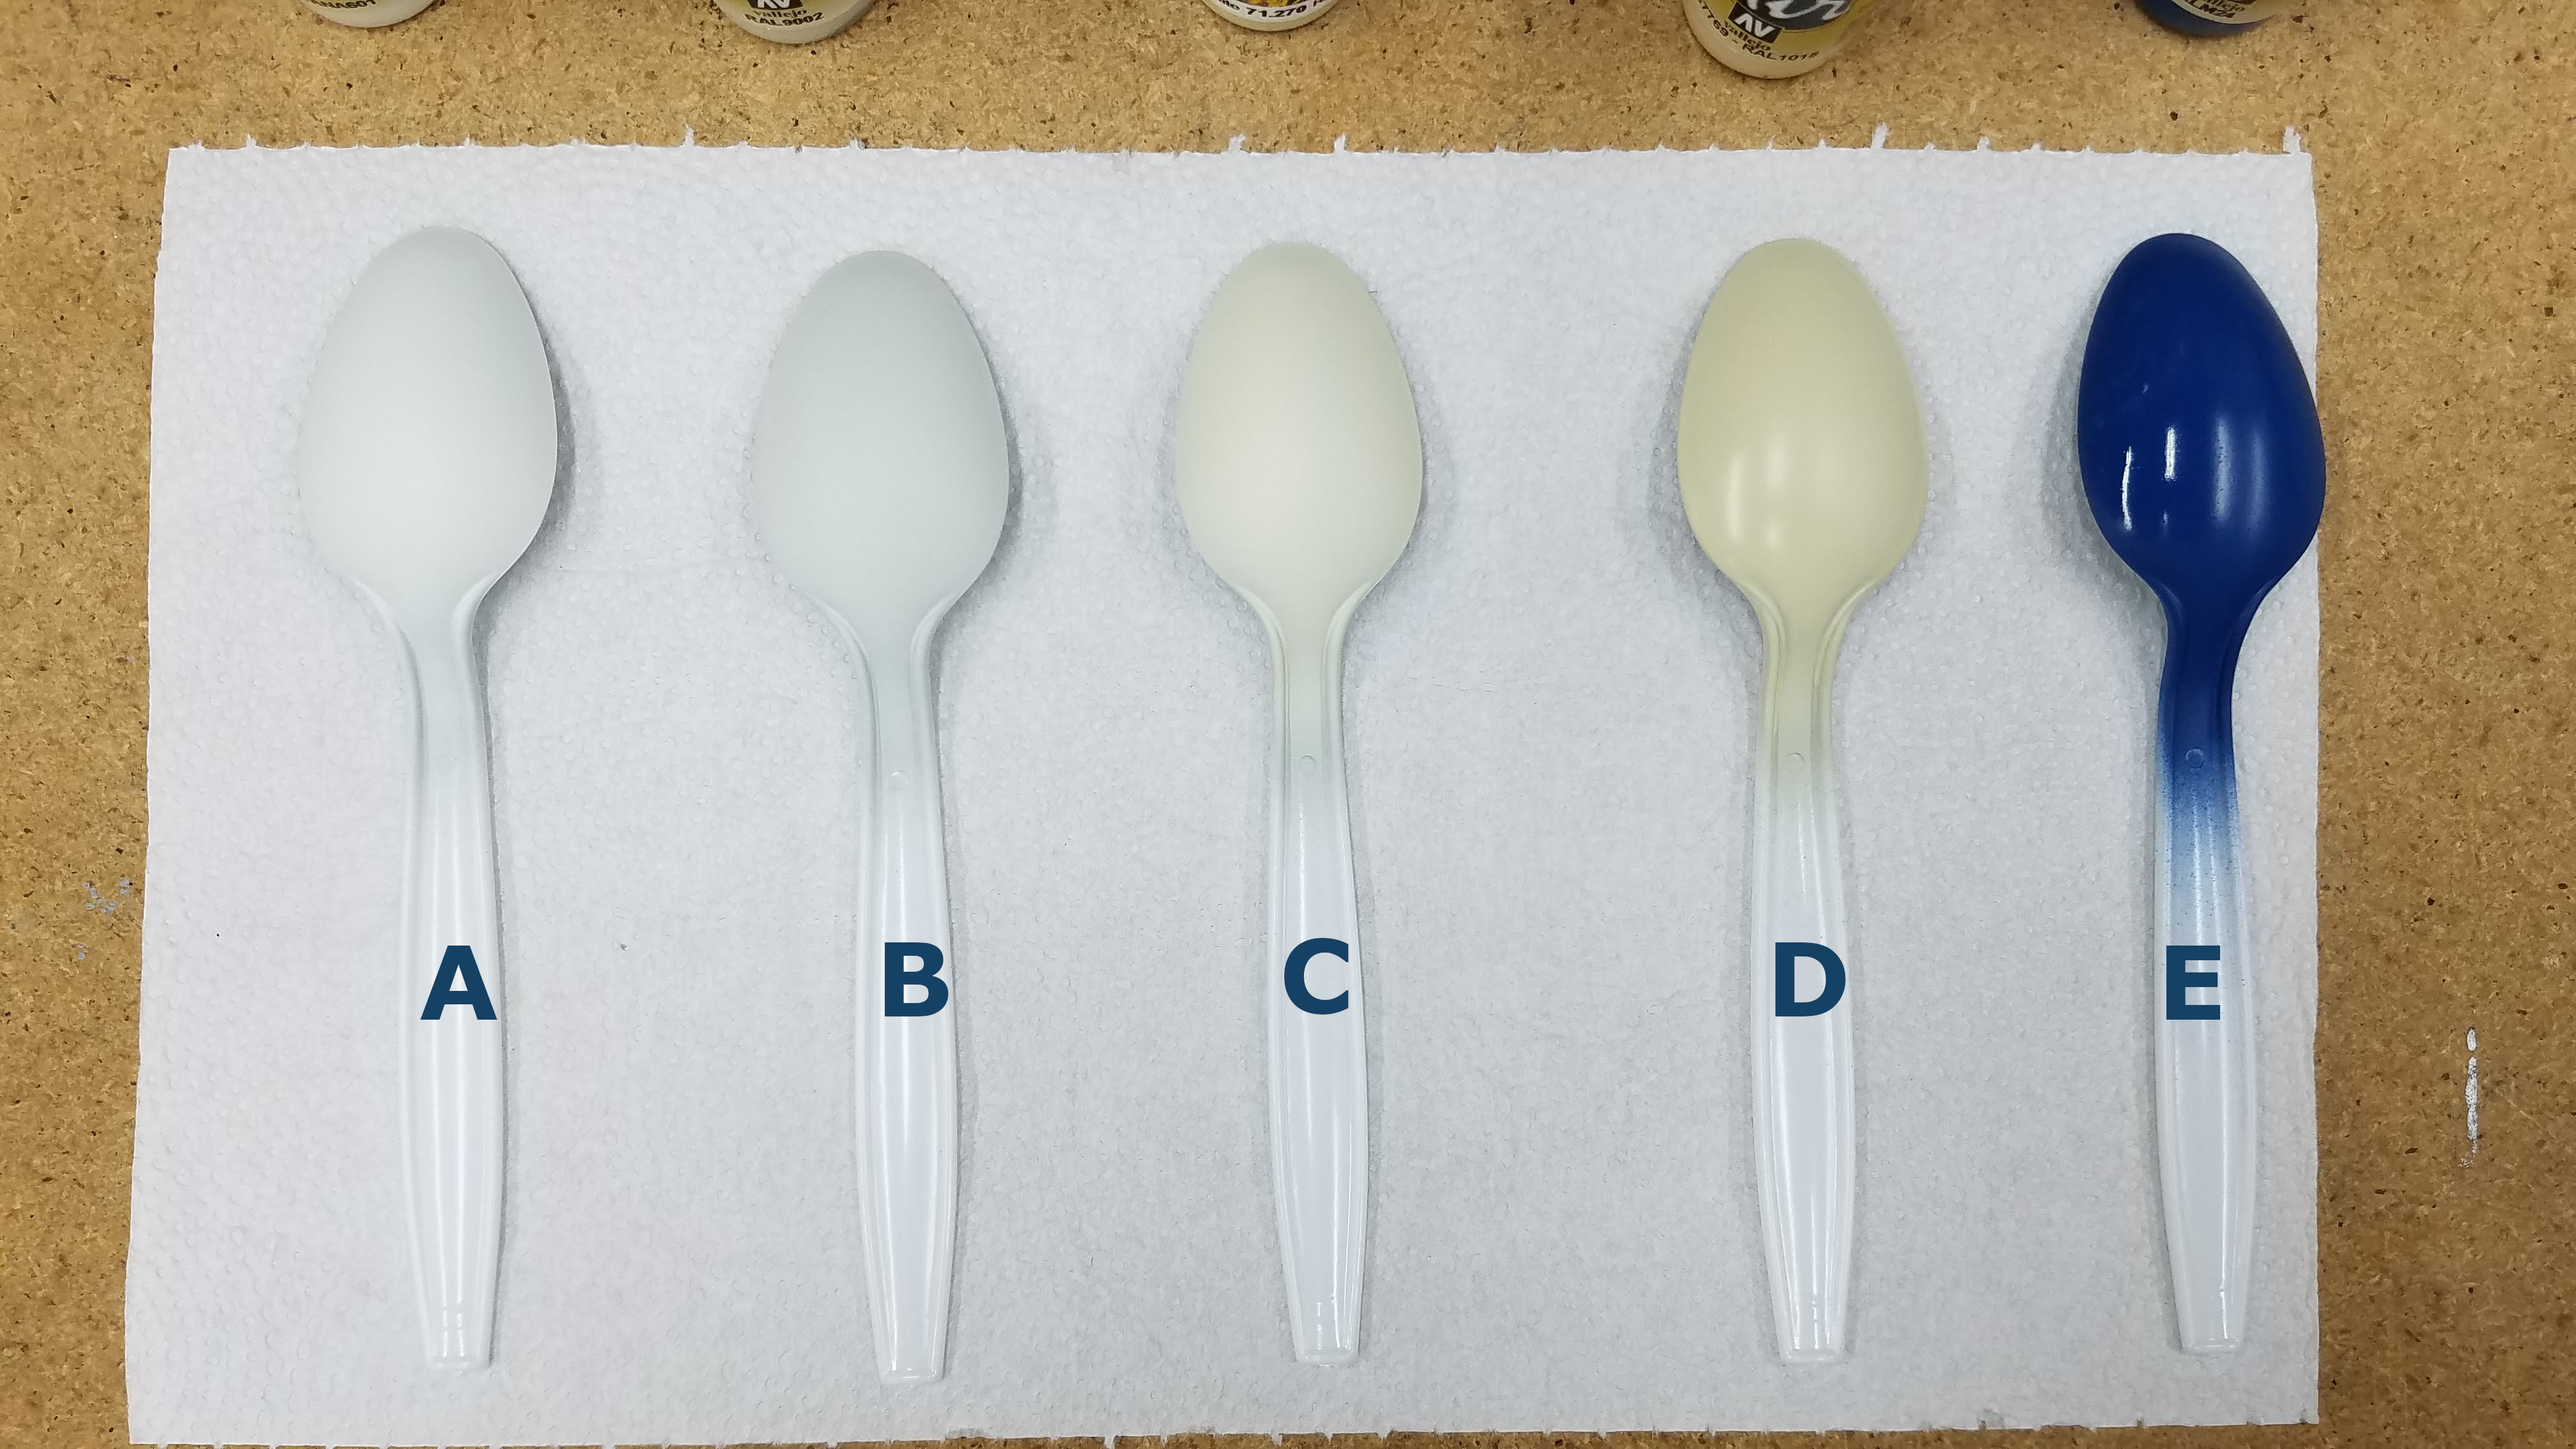 Test spoons for body colors.